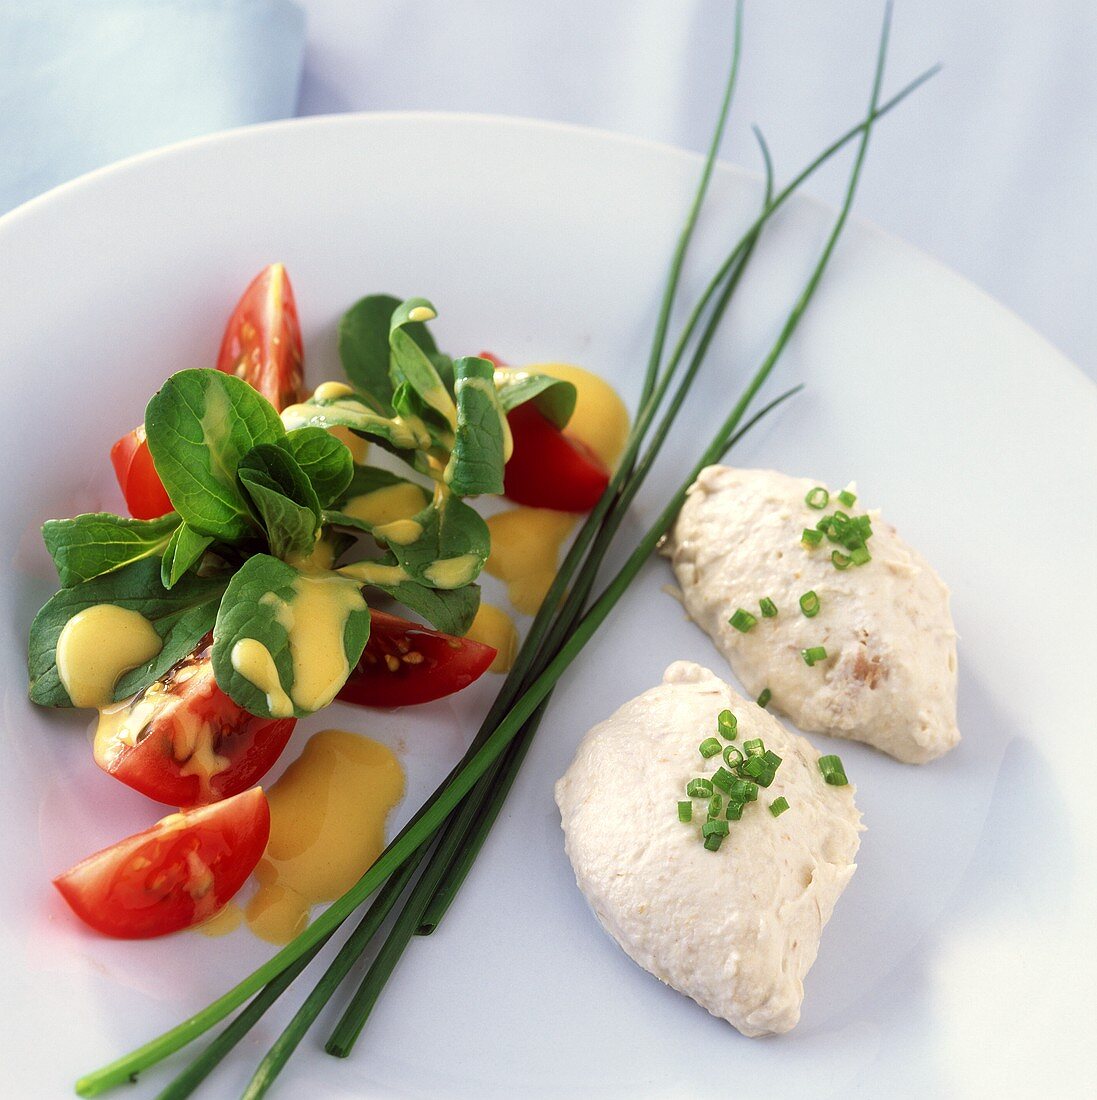 Mackerel mousse with corn salad, tomatoes and chives